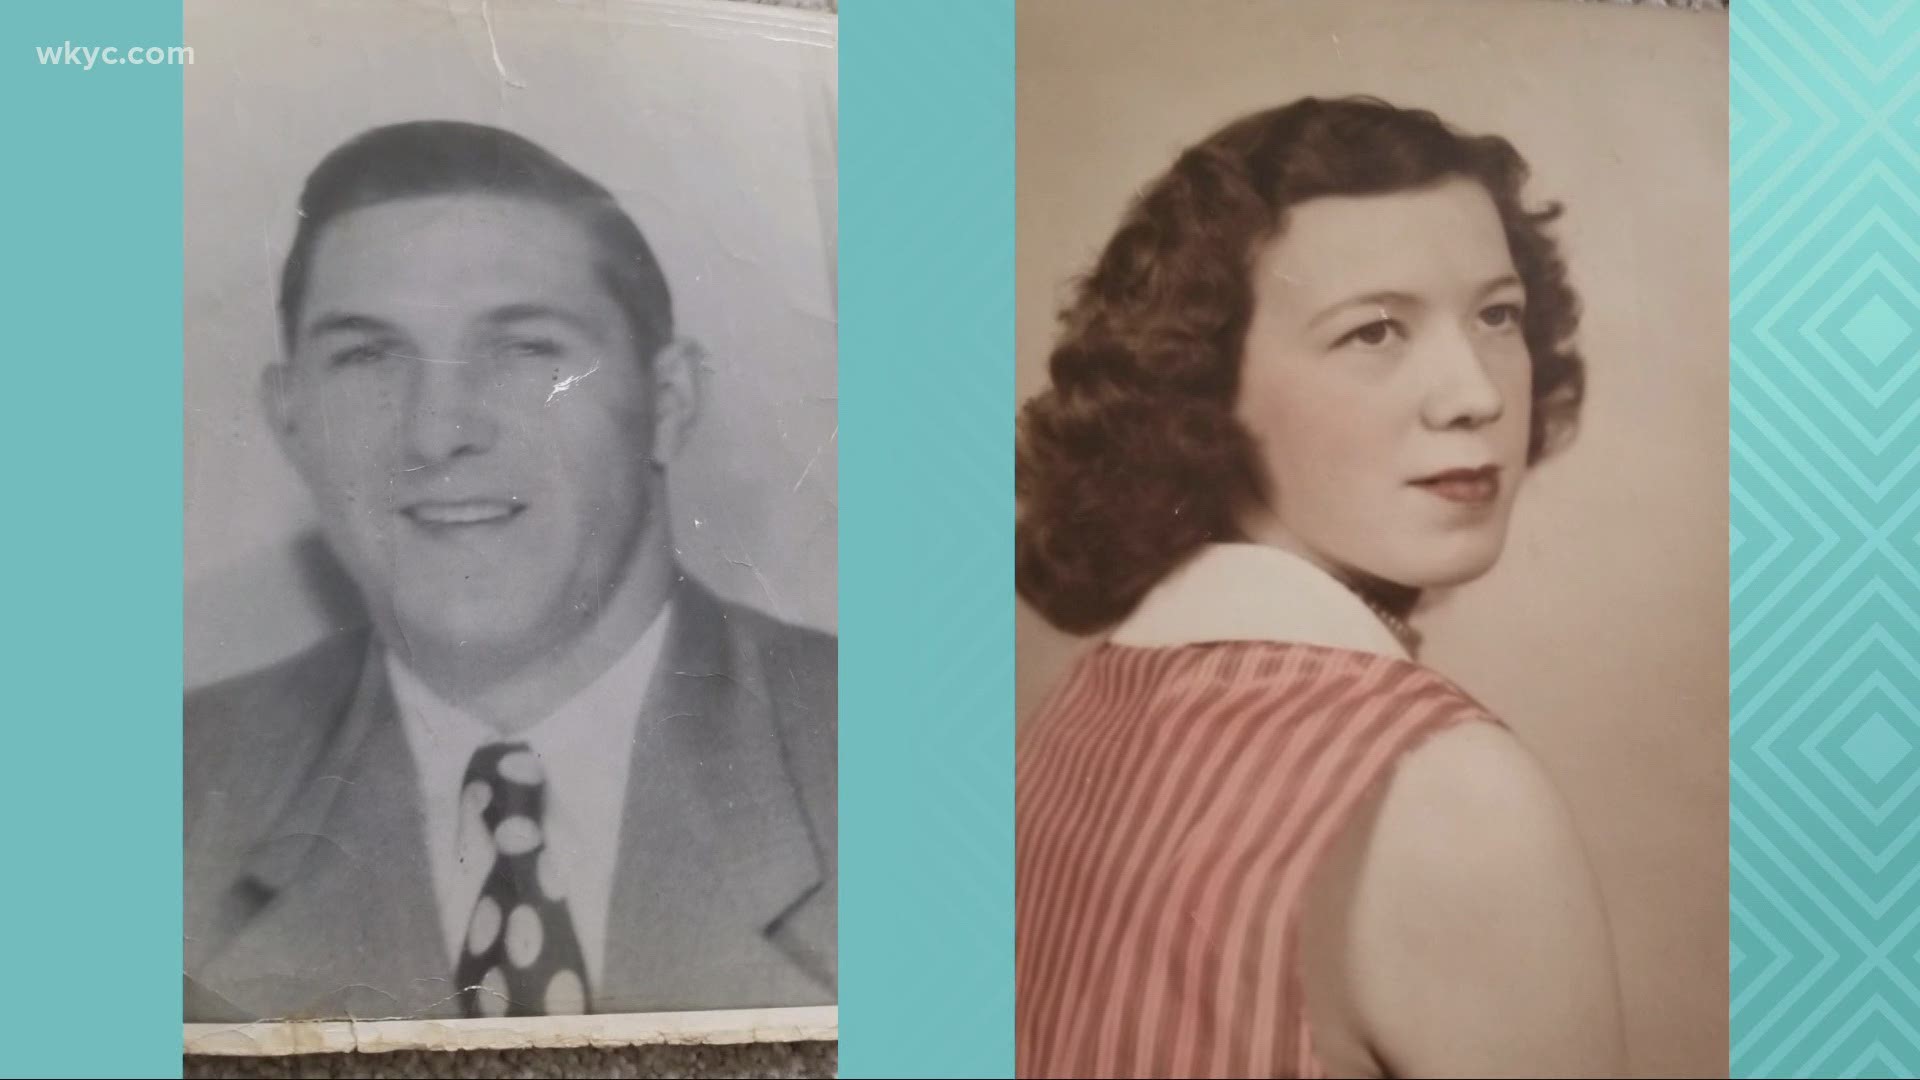 The elderly are by far the most vulnerable during the pandemic. However, Rachael Polansky shares the story of couple reunited after 3 months apart.